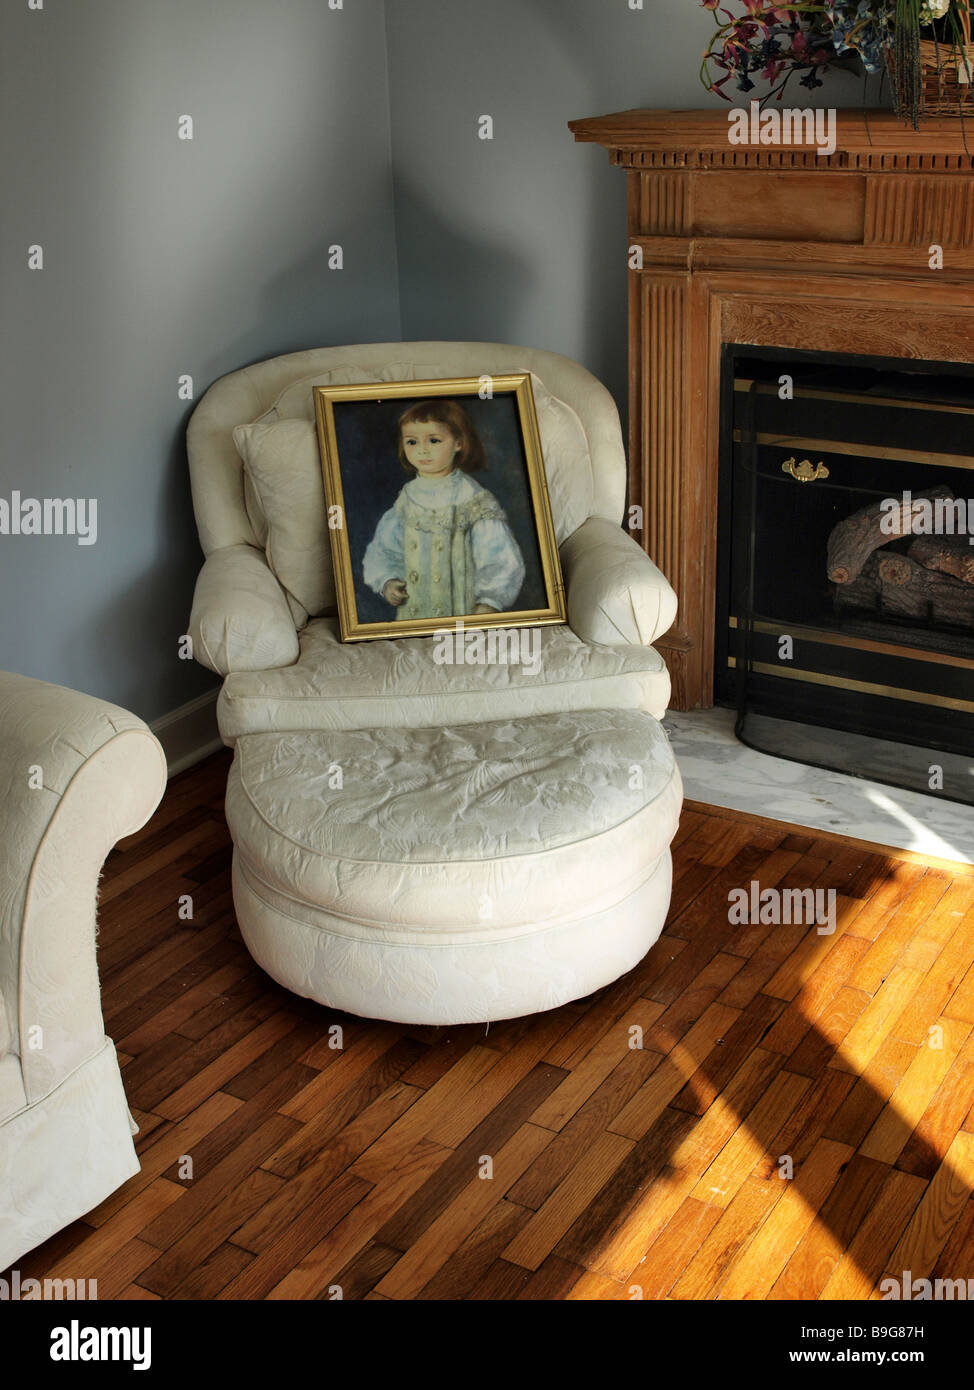 living room scene with white soft chair holding a painting next to fireplace mantel on wooden floor Stock Photo